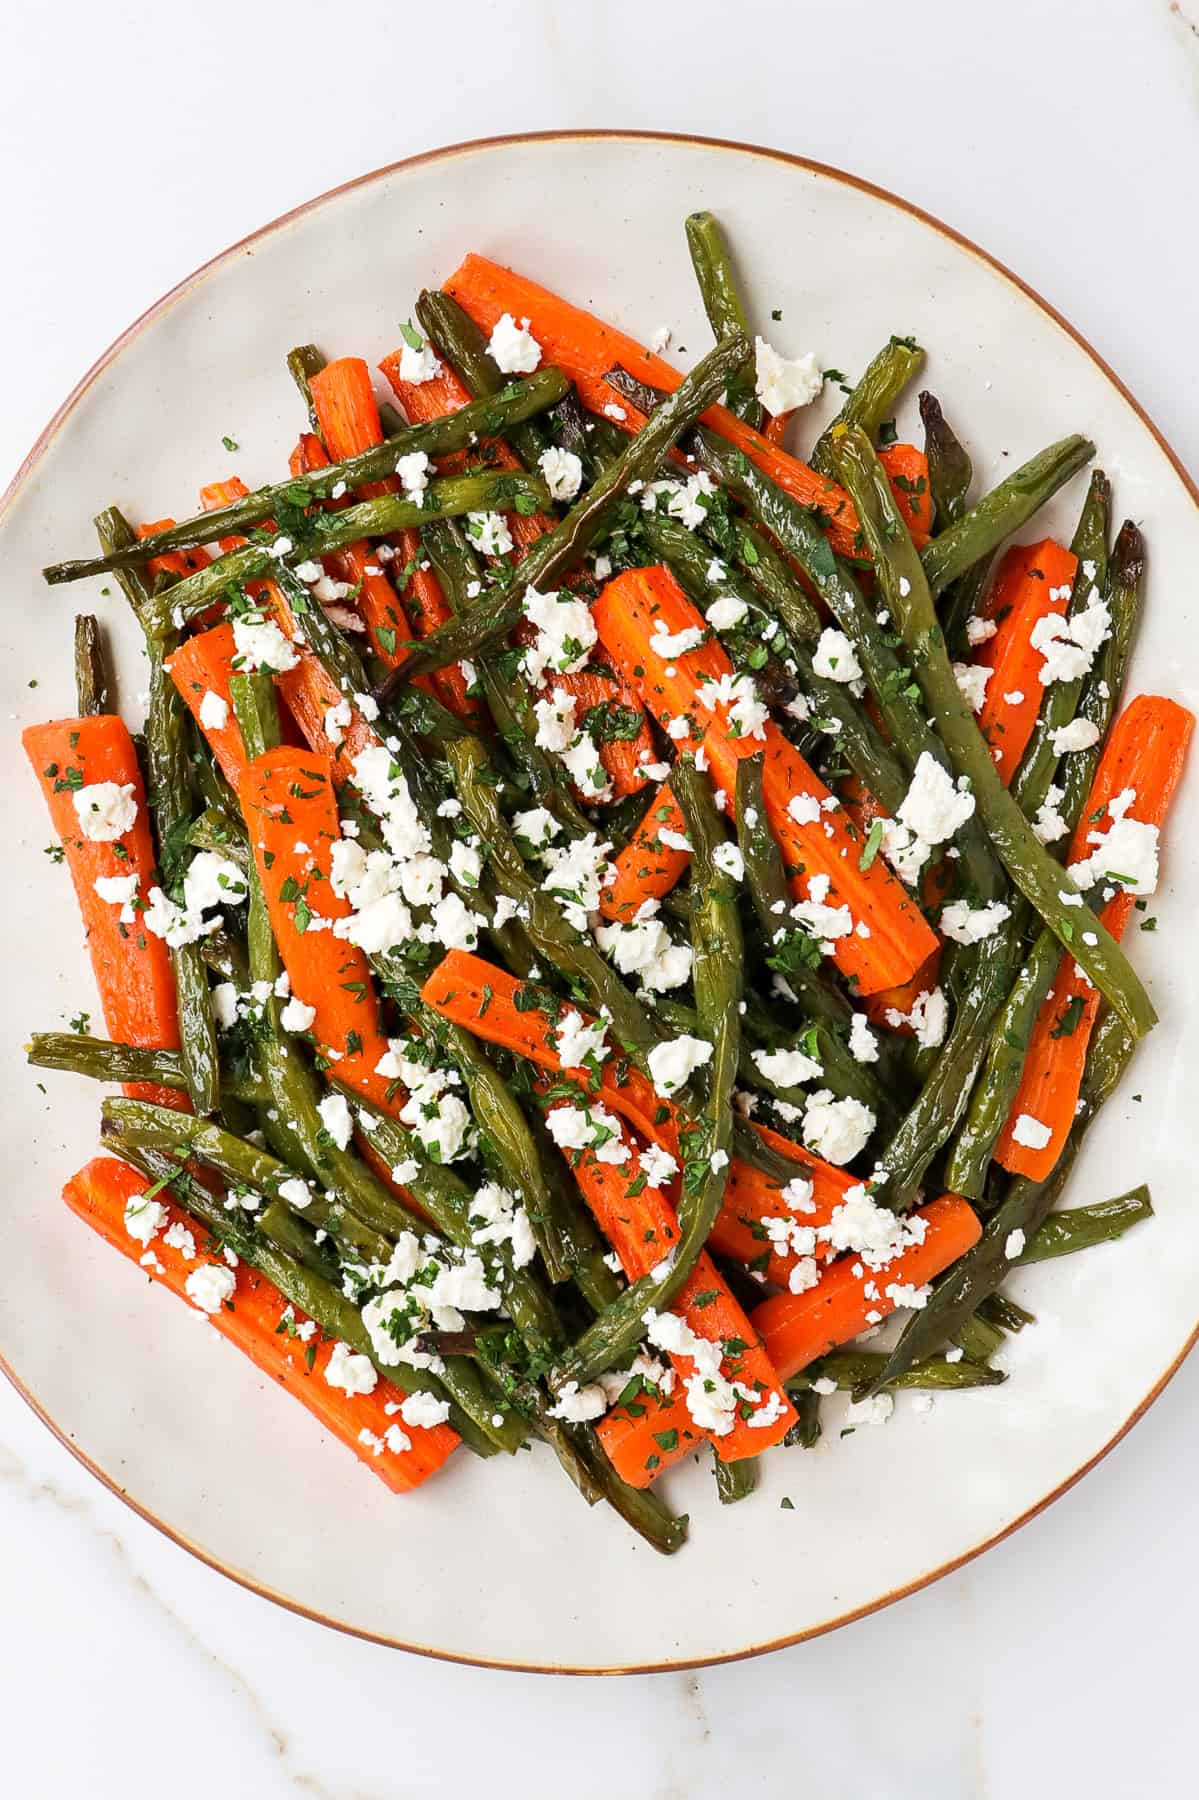 Roasted carrots and green beans with feta on a plate.